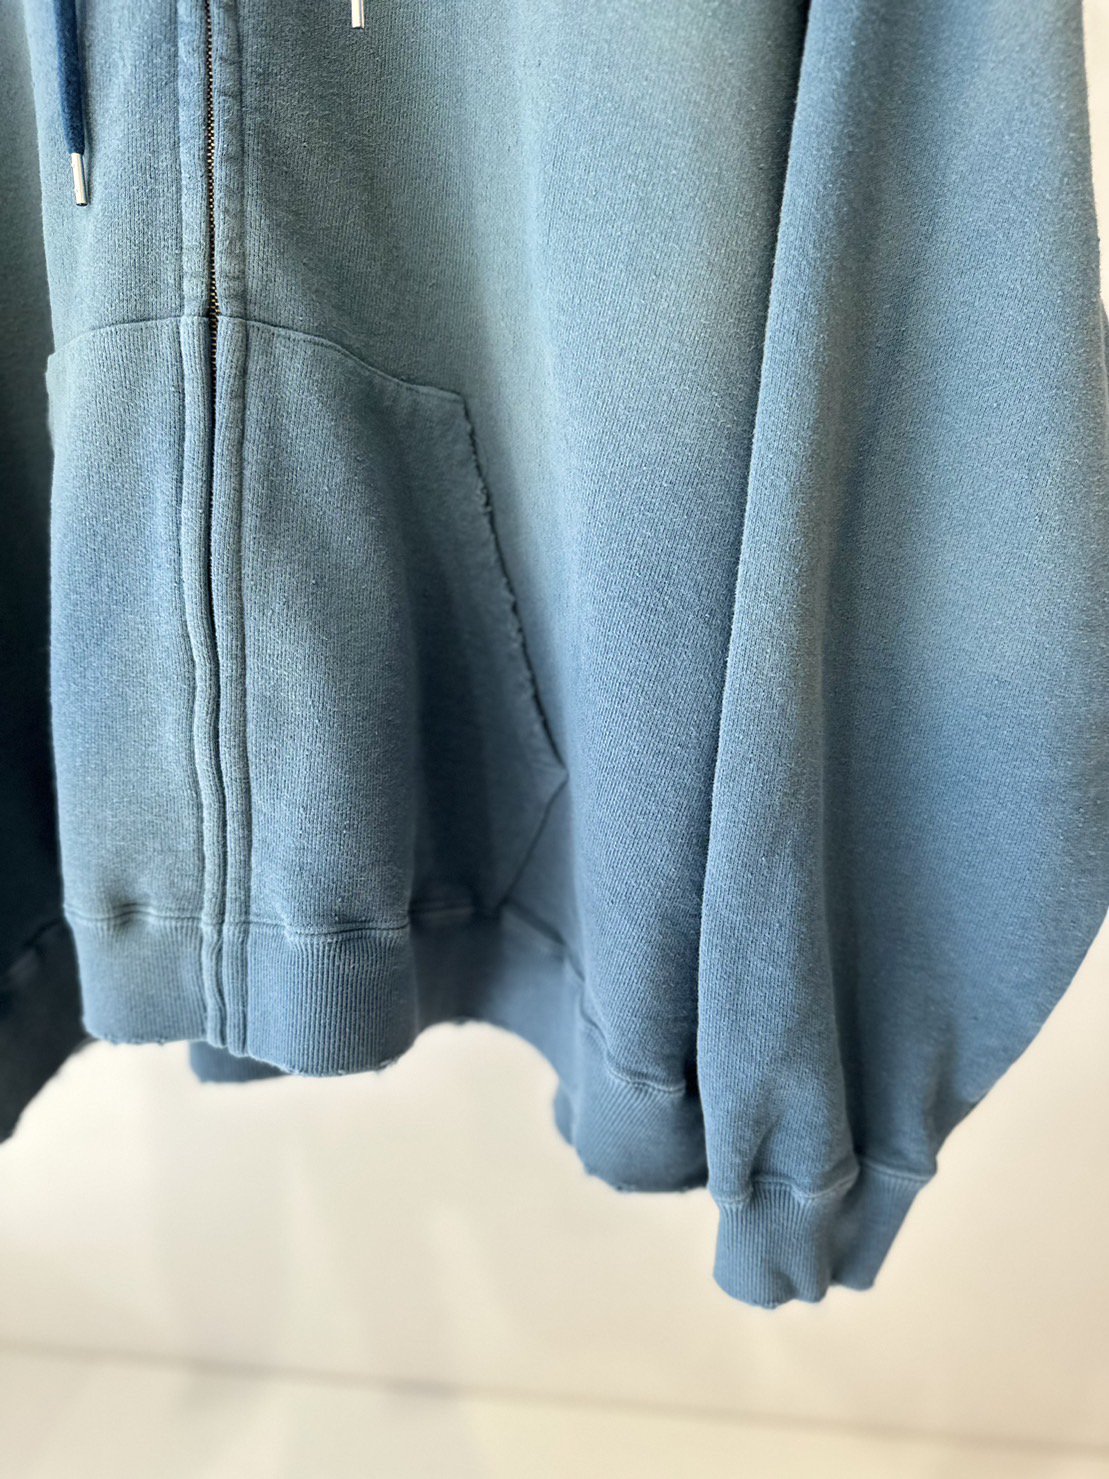 DAIRIKU<br />Water-repellent Vintage Wash Hoodie / Youth Blue<img class='new_mark_img2' src='https://img.shop-pro.jp/img/new/icons14.gif' style='border:none;display:inline;margin:0px;padding:0px;width:auto;' />